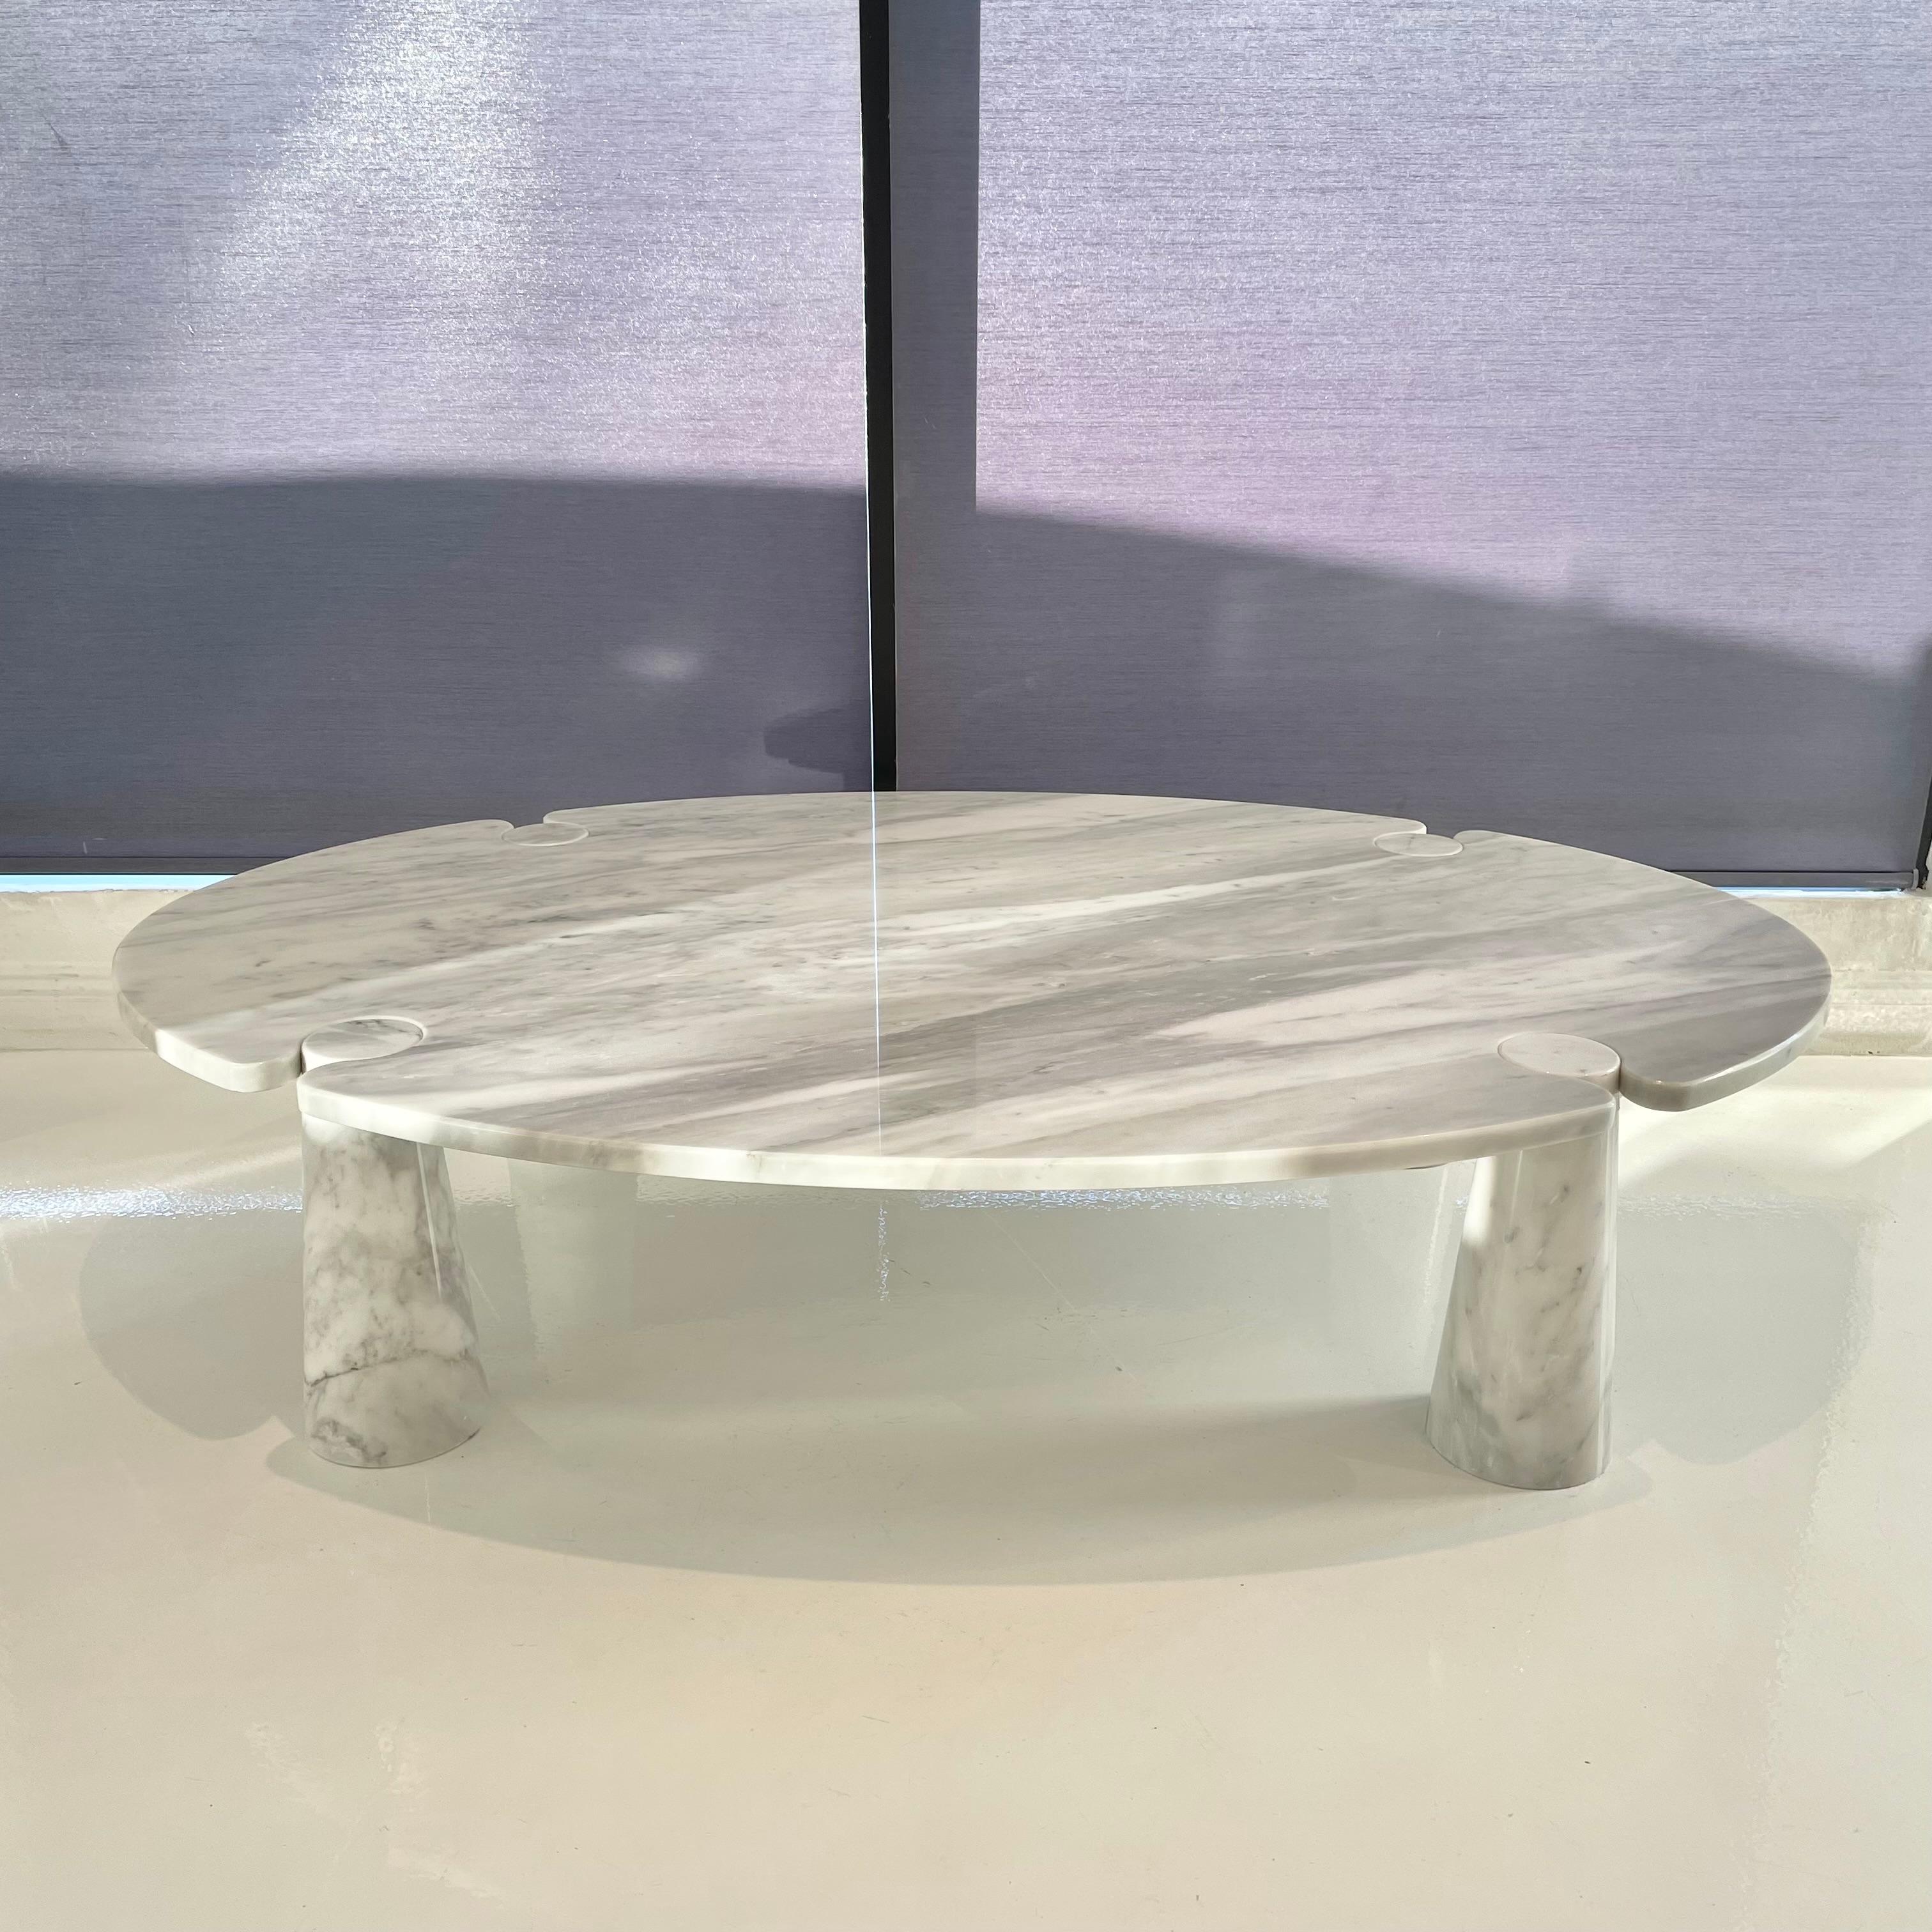 Elegant Carrara marble cocktail table by Angelo Mangiarotti. Massive scale. Part of the 